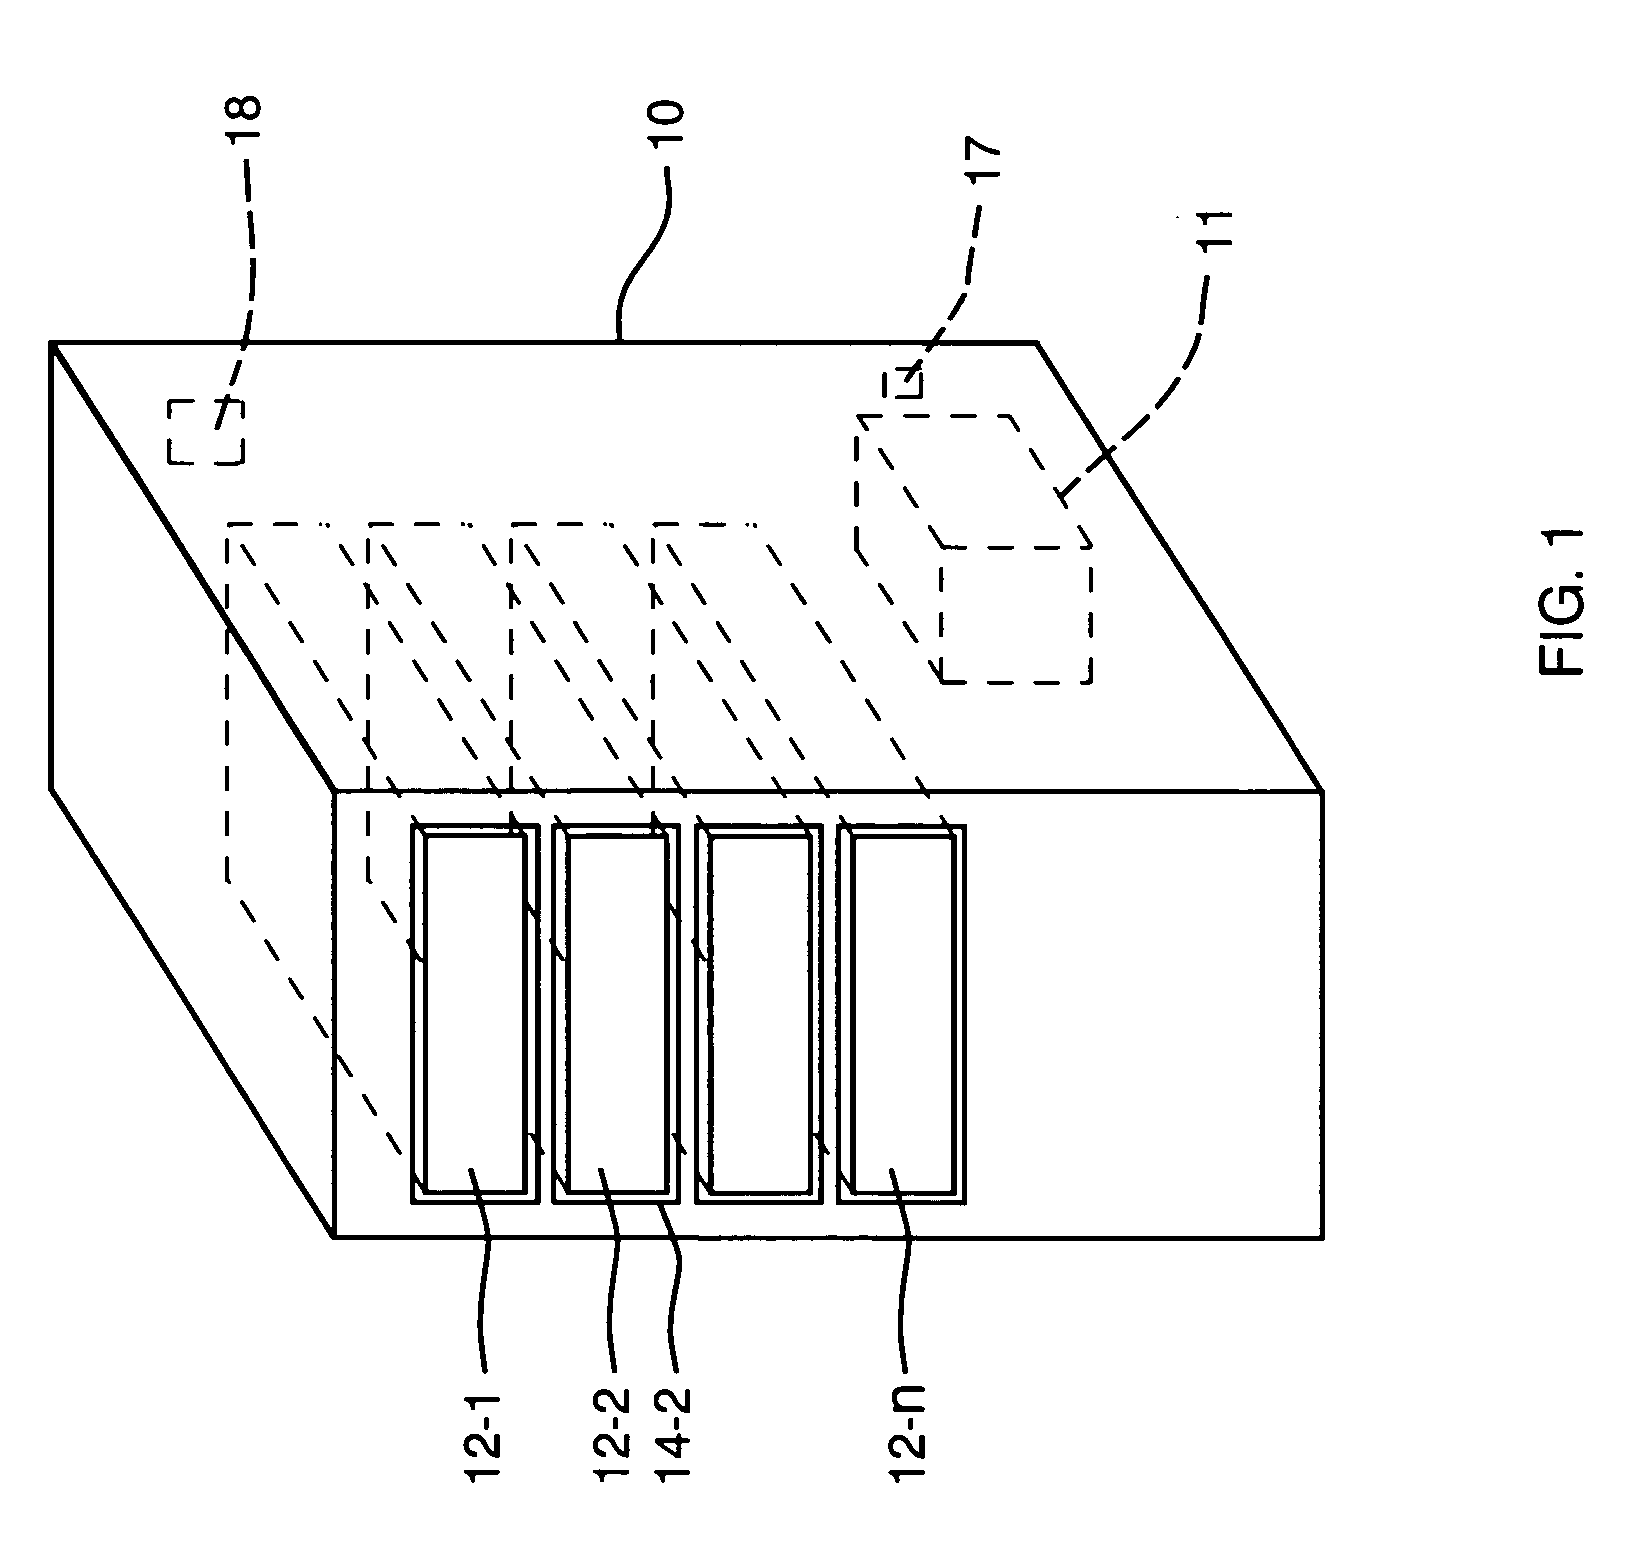 Data bank providing connectivity among multiple mass storage media devices using daisy chained universal bus interface